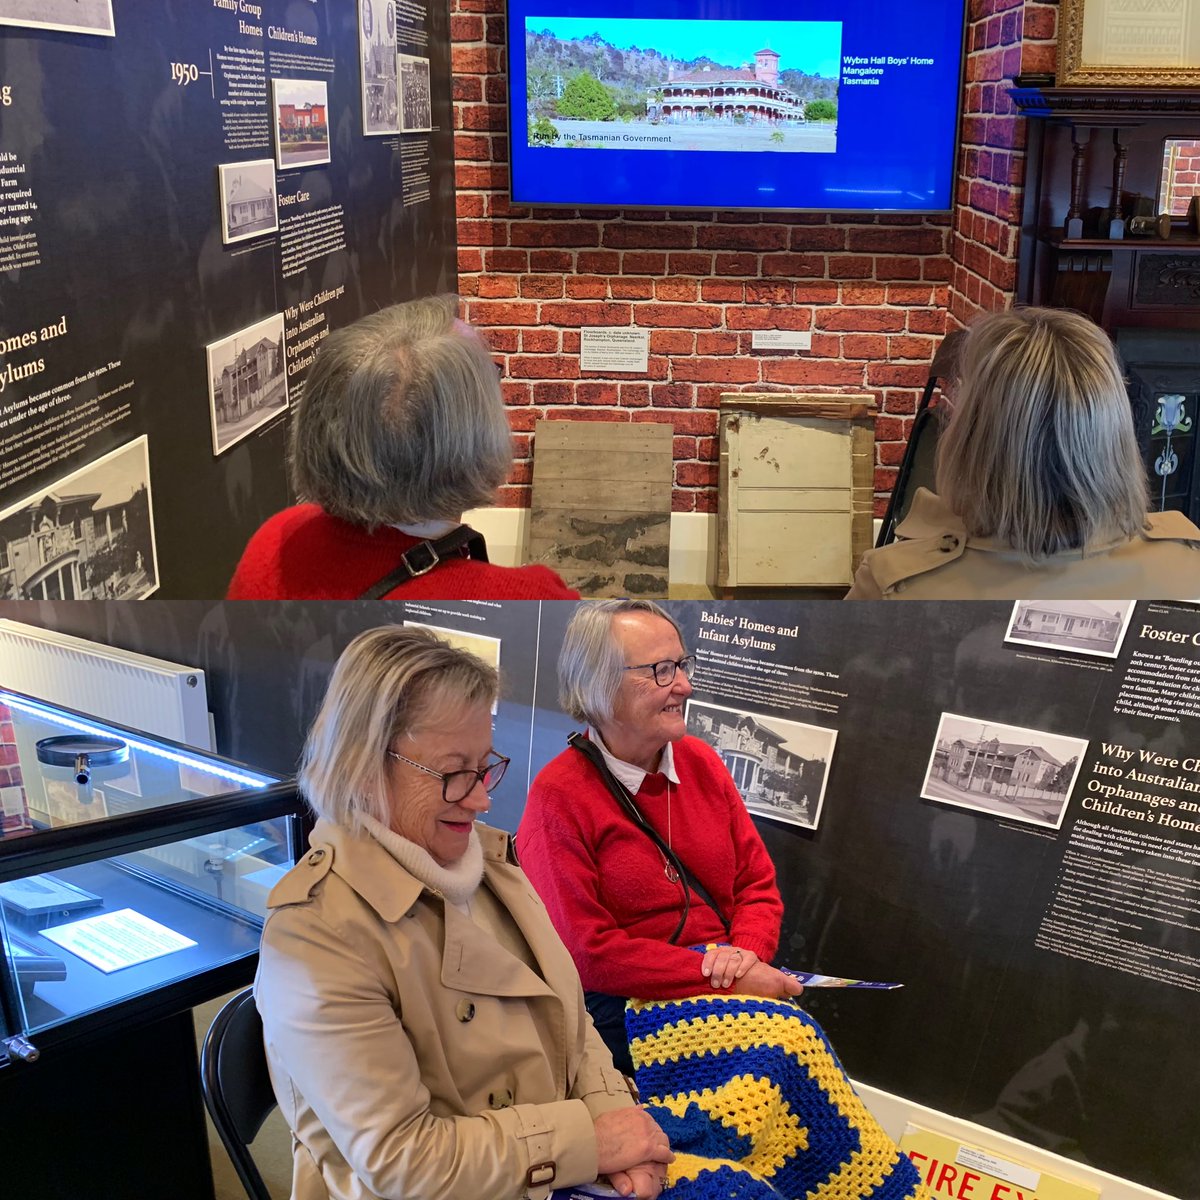 Today we had 4 visitors at the Australian Orphanage Museum Dianne&Margaret of #Geelong Loved how they watched DVD of 8 #Children’sHomes in each state of OZ With the granny blanket over their knees Also thanks $50 donation ⁦@RichardMarlesMP⁩ ⁦@geelongaddy⁩ #SpringSt